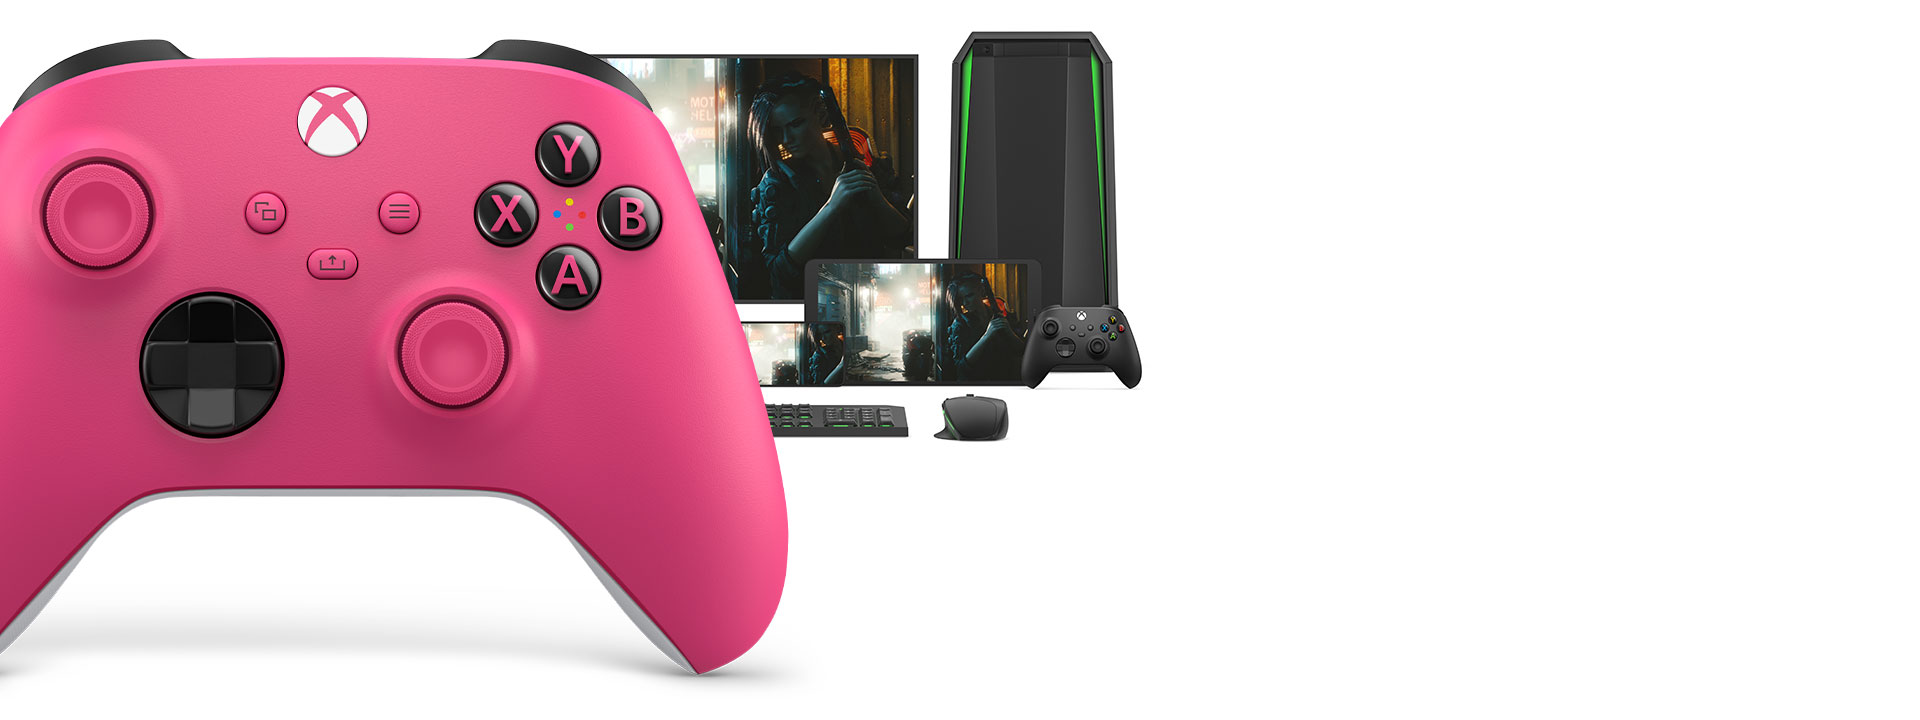 Xbox Wireless Controller – Deep Pink with a computer, TV, and a mobile device.